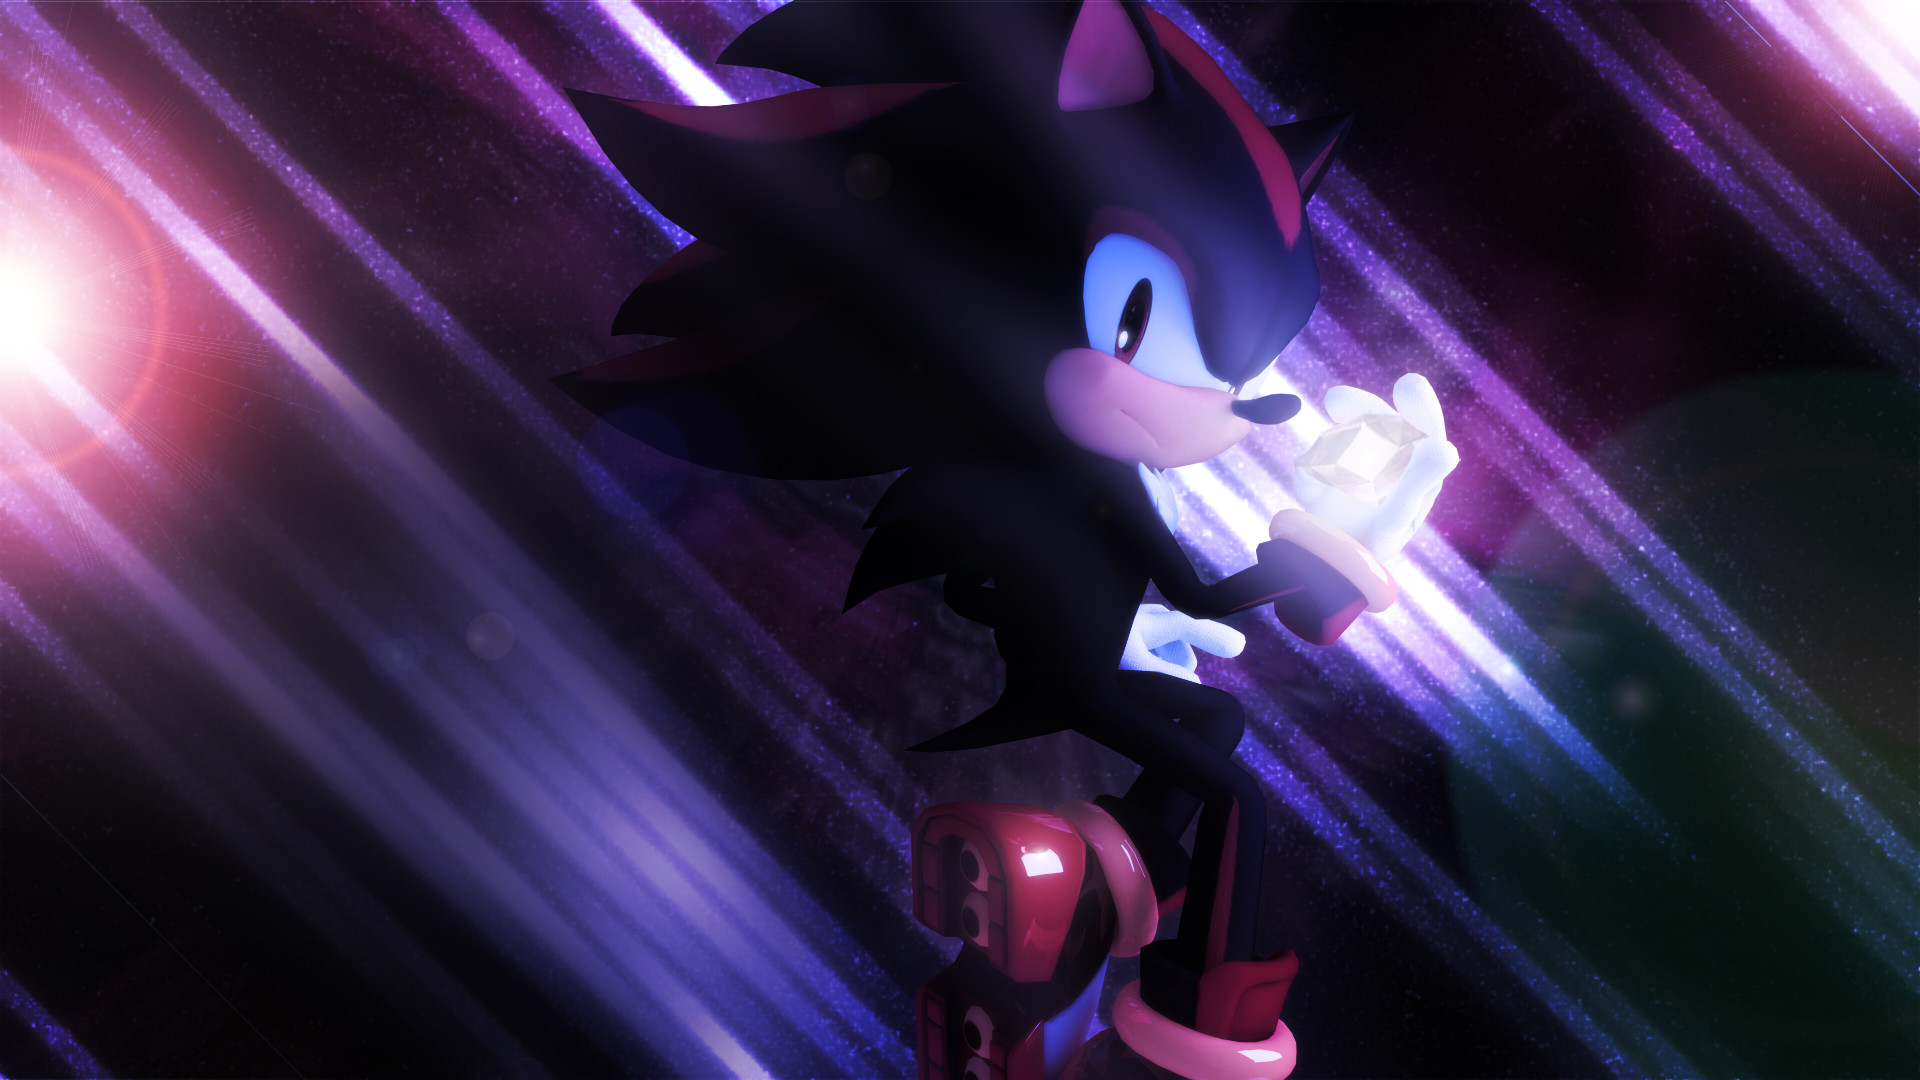 Shadow The Hedgehog Wallpapers.